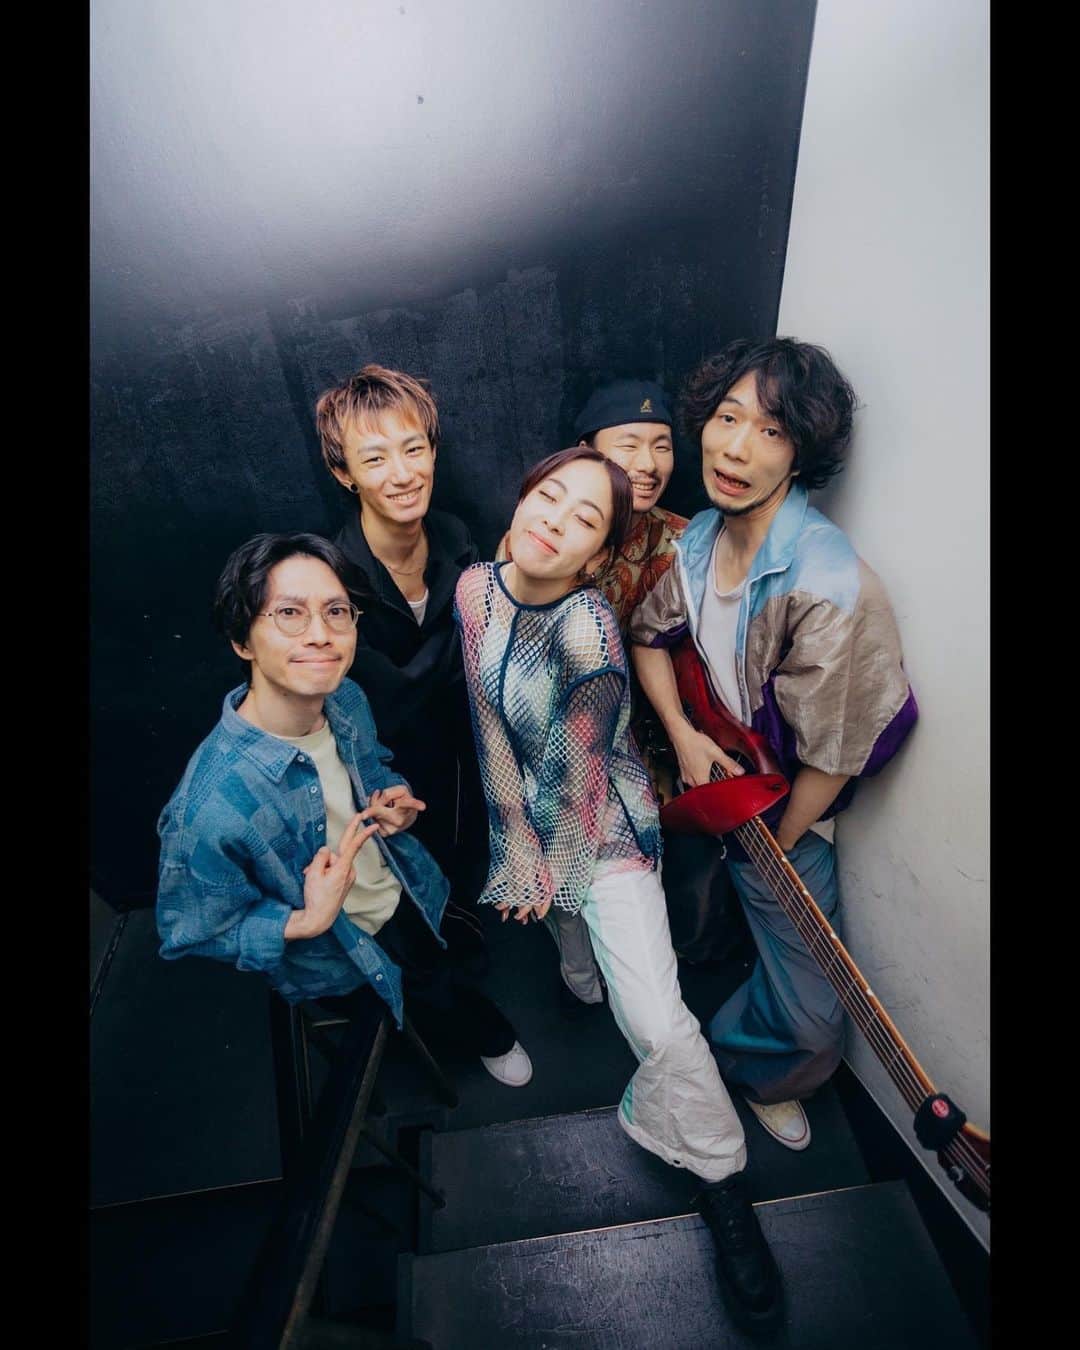 EOWのインスタグラム：「LIVE Photo📸 2023.10.12 📍名古屋ell.SIZE  M1「最低な日々」 M2「ON」 M3「RED」 M4「EVER」 M5「嫌んなるわ」 M6「百花」 M7「(this is the) DAY」  Photo by @yoshrum   #eow #live #photo」